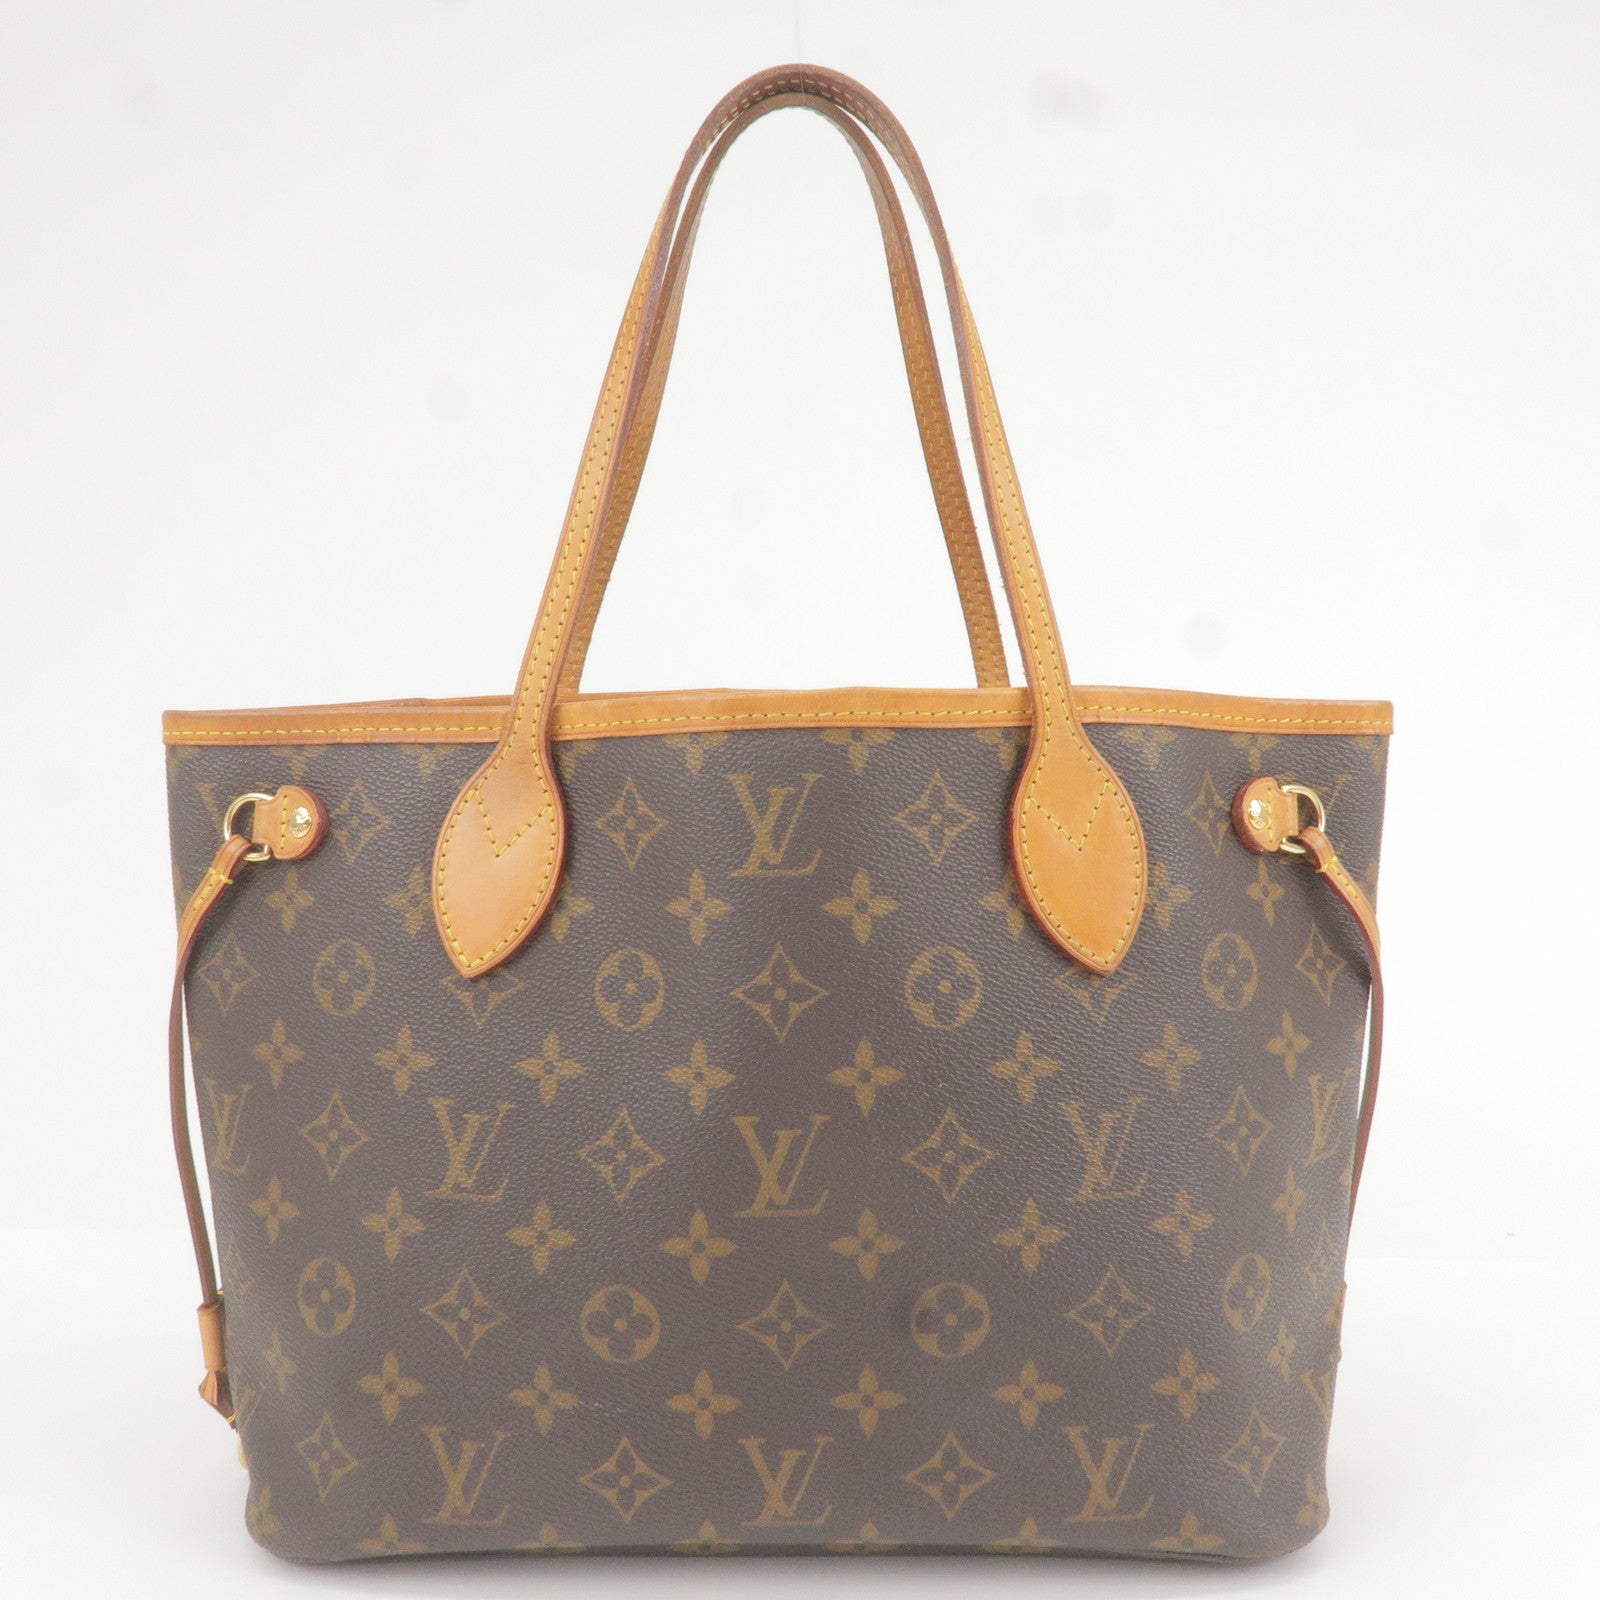 Pre-Owned Louis Vuitton Neverfull PM Epi Tote Bag - Excellent Condition 